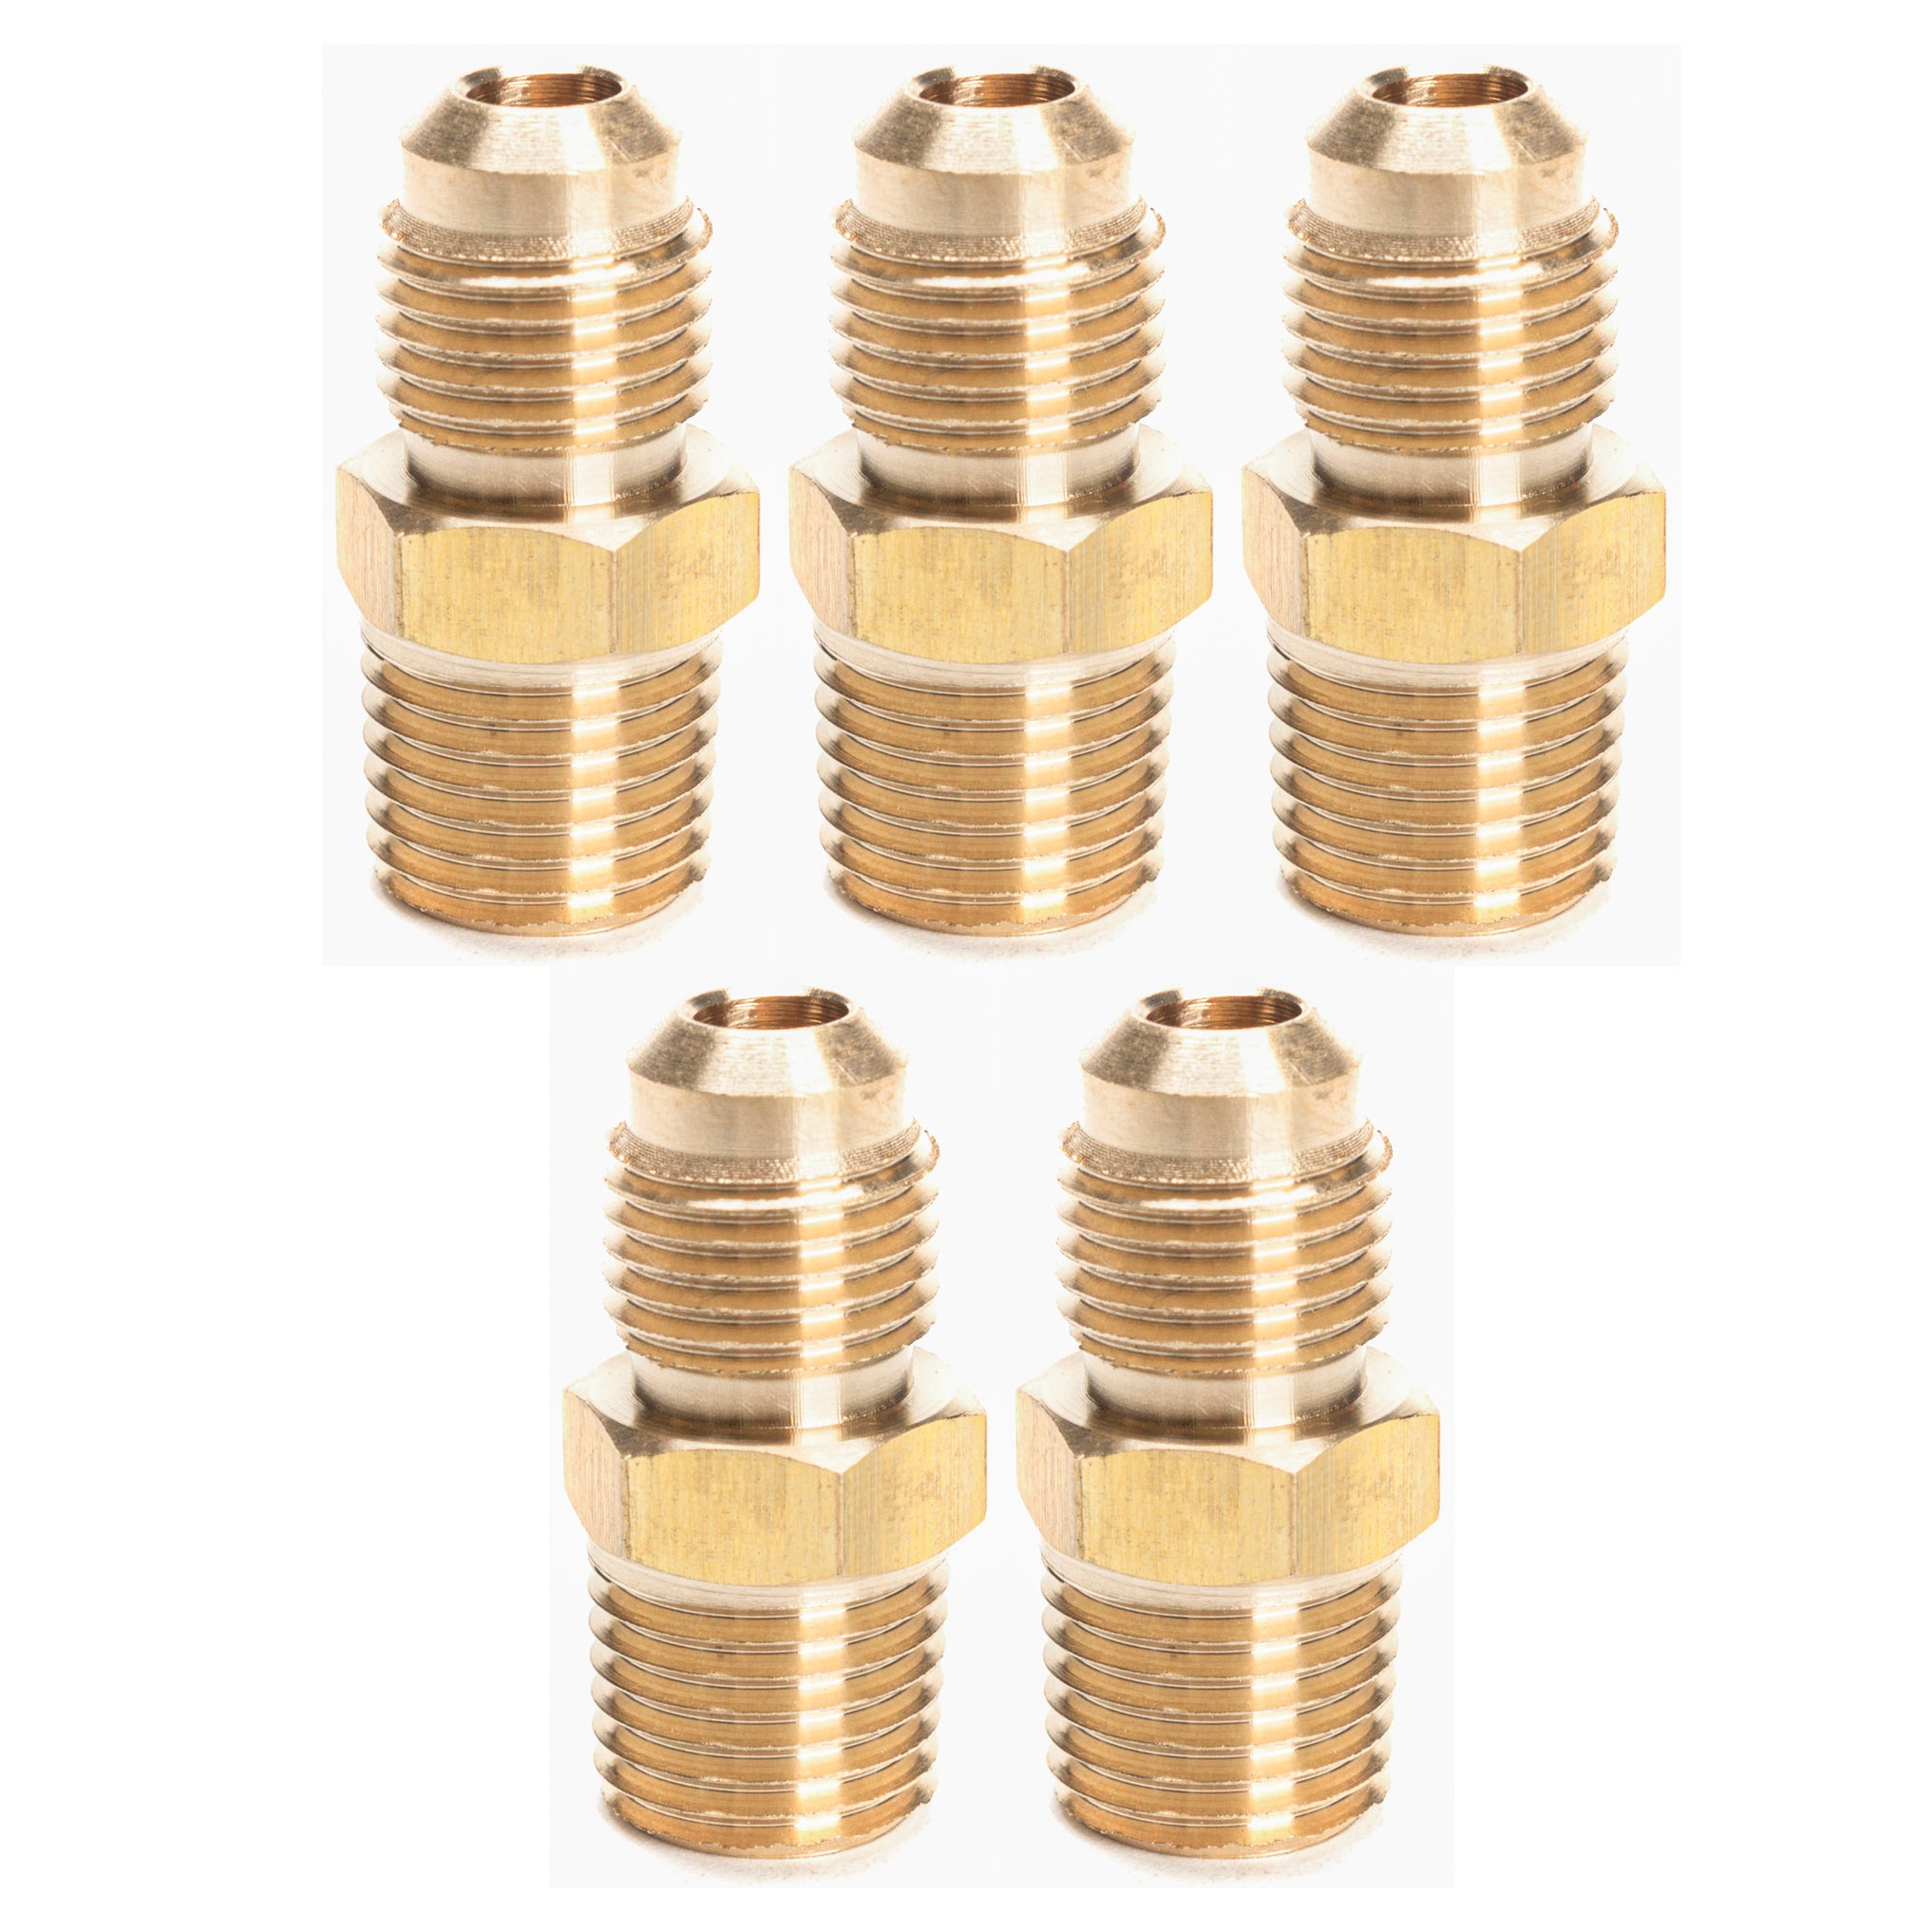 LTWFITTING Brass 1/2-Inch OD x 1/2-Inch Male NPT Compression Connector  Fitting(Pack of 5)